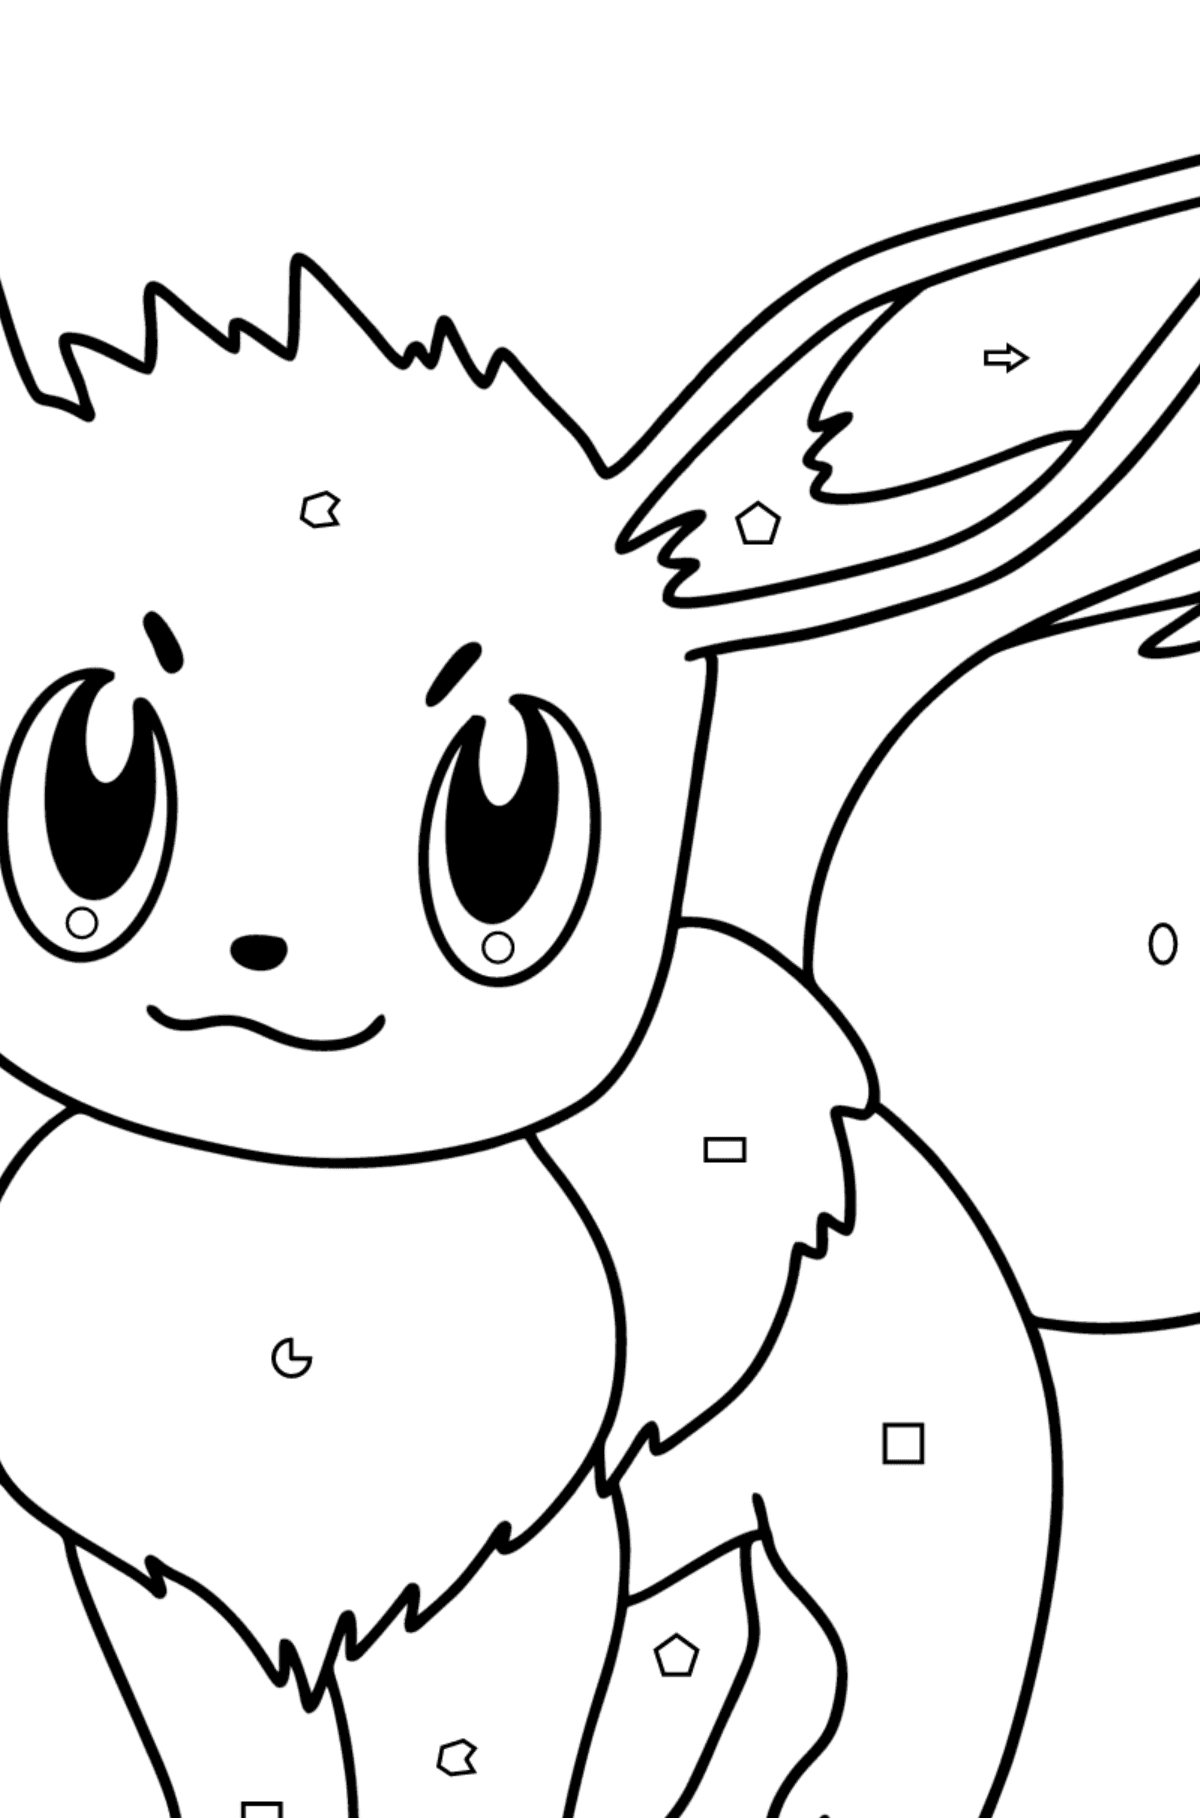 Pokemon Go Eevee coloring page - Coloring by Geometric Shapes for Kids